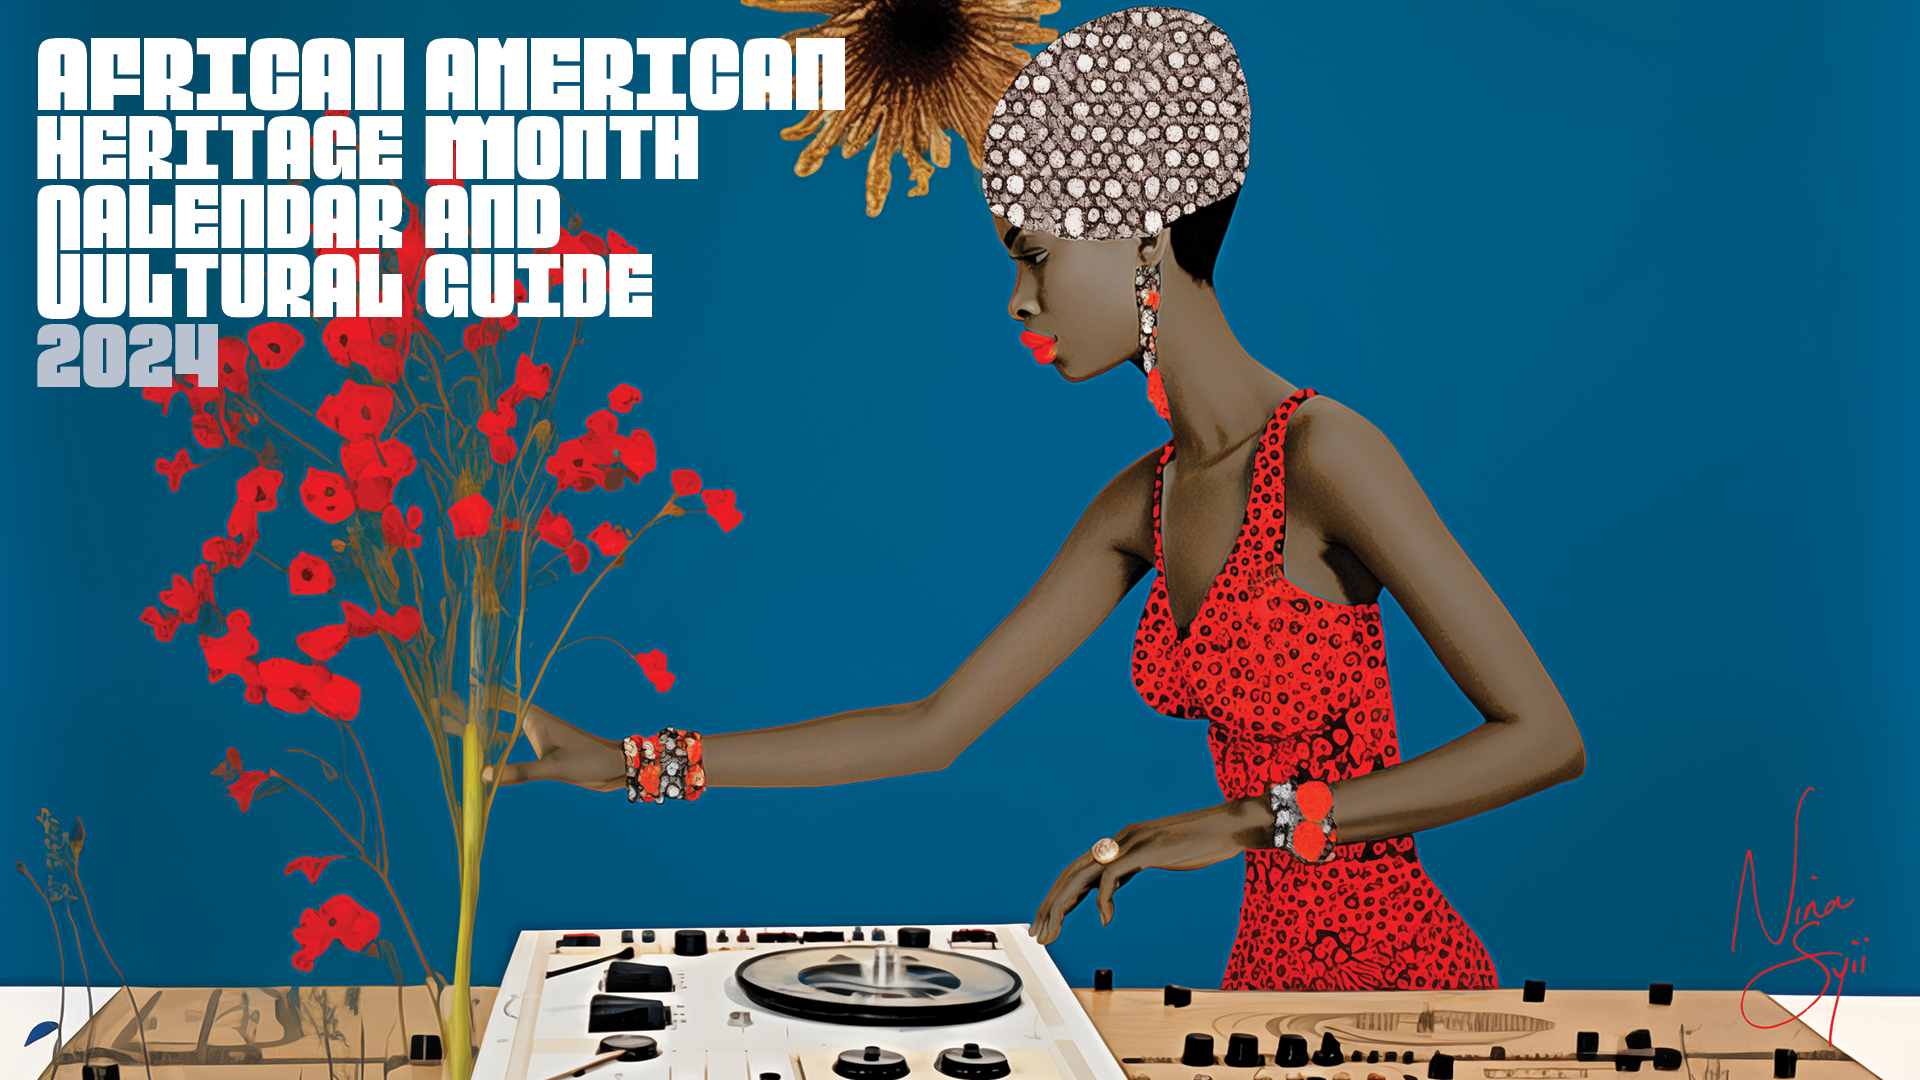 The image is a poster featuring a text along the left that reads: "AFRICAN AMERICAN HERITAGE MONTH CALENDAR AND CULTURAL GUIDE 2024.9 99". It is related to celebrating African American heritage. The poster also includes a woman wearing traditional clothing.